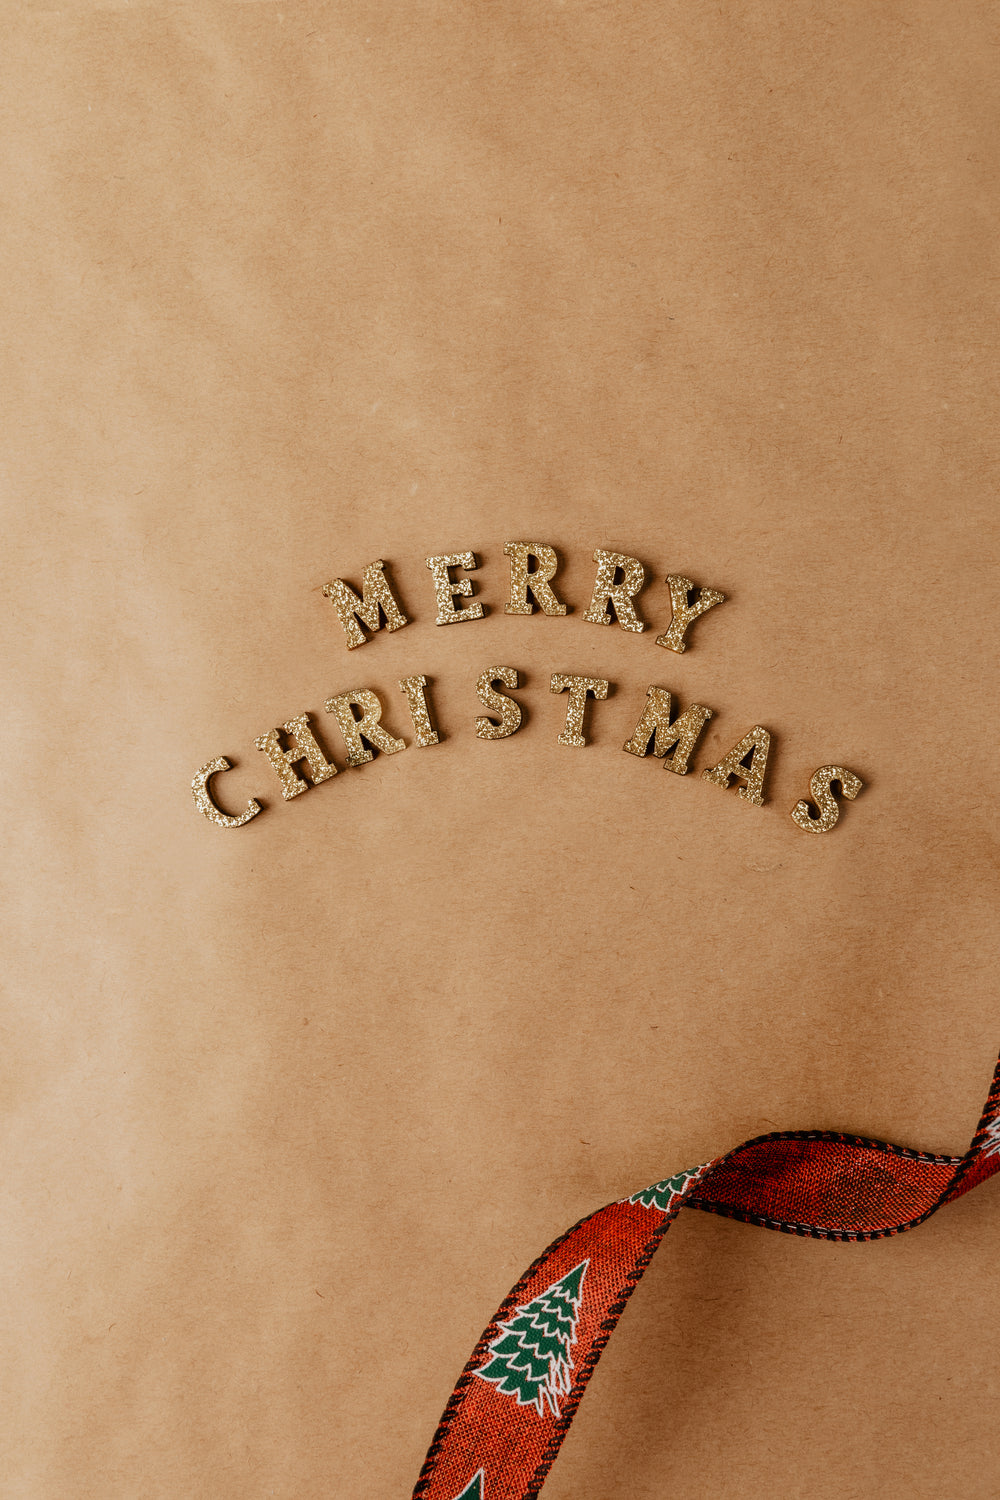 merry christmas spelled out in gold letters